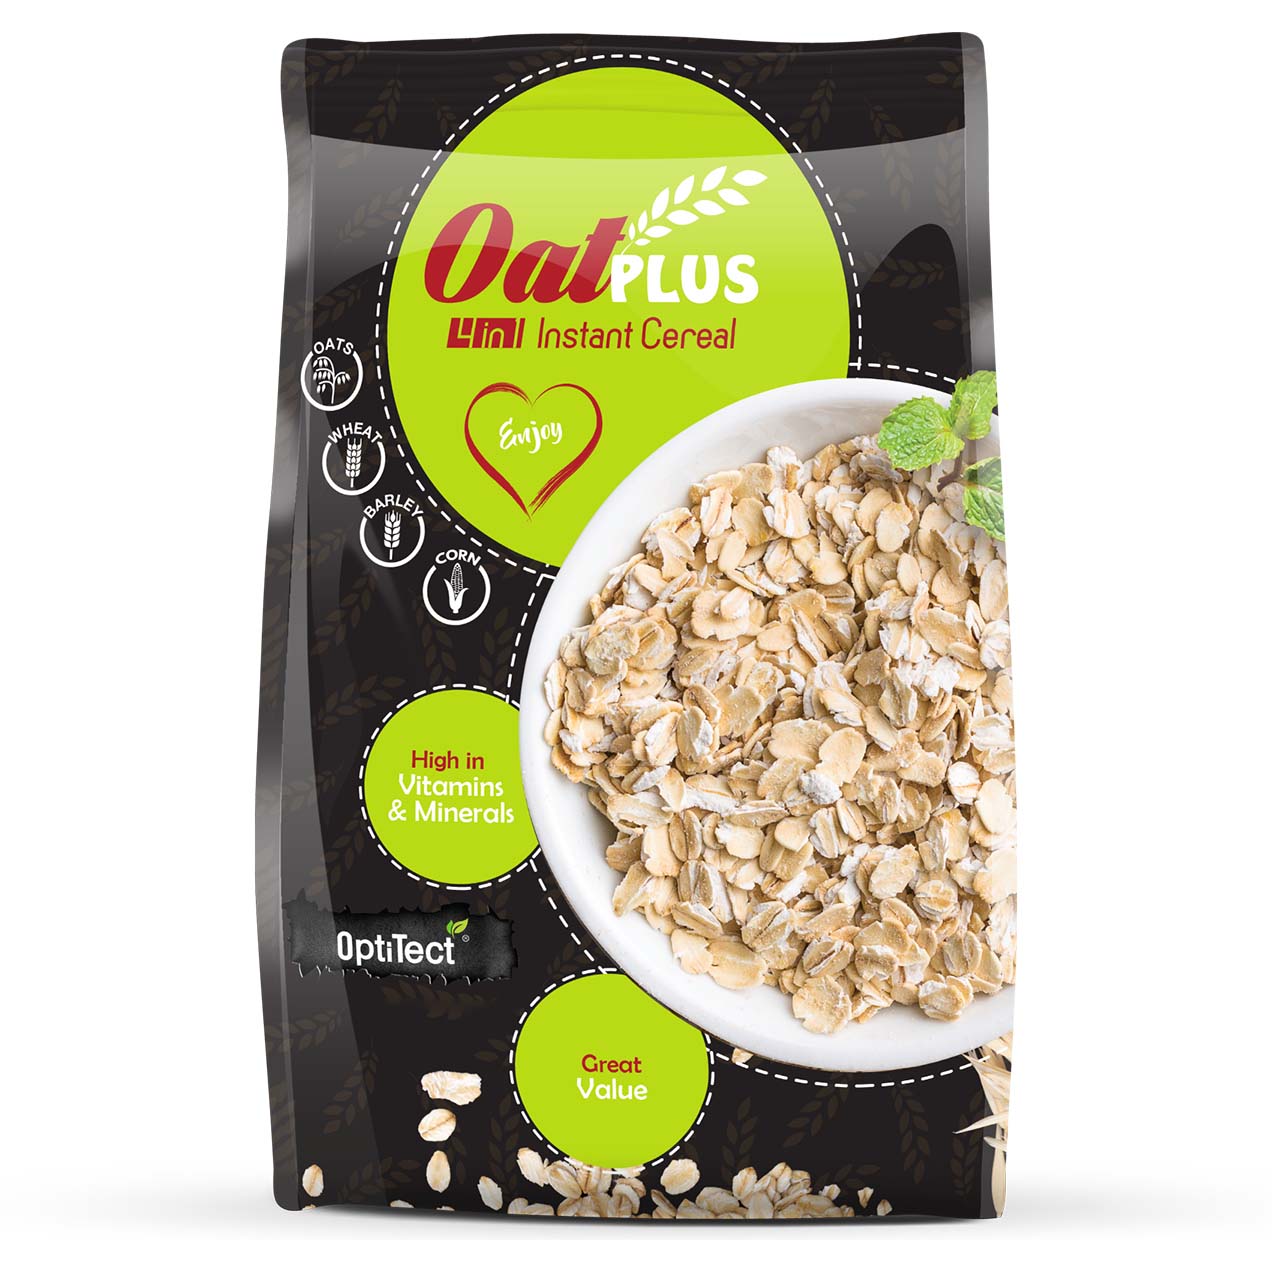 Optitect Oat Plus 4 in 1 Instant Cereal 20 Sachets